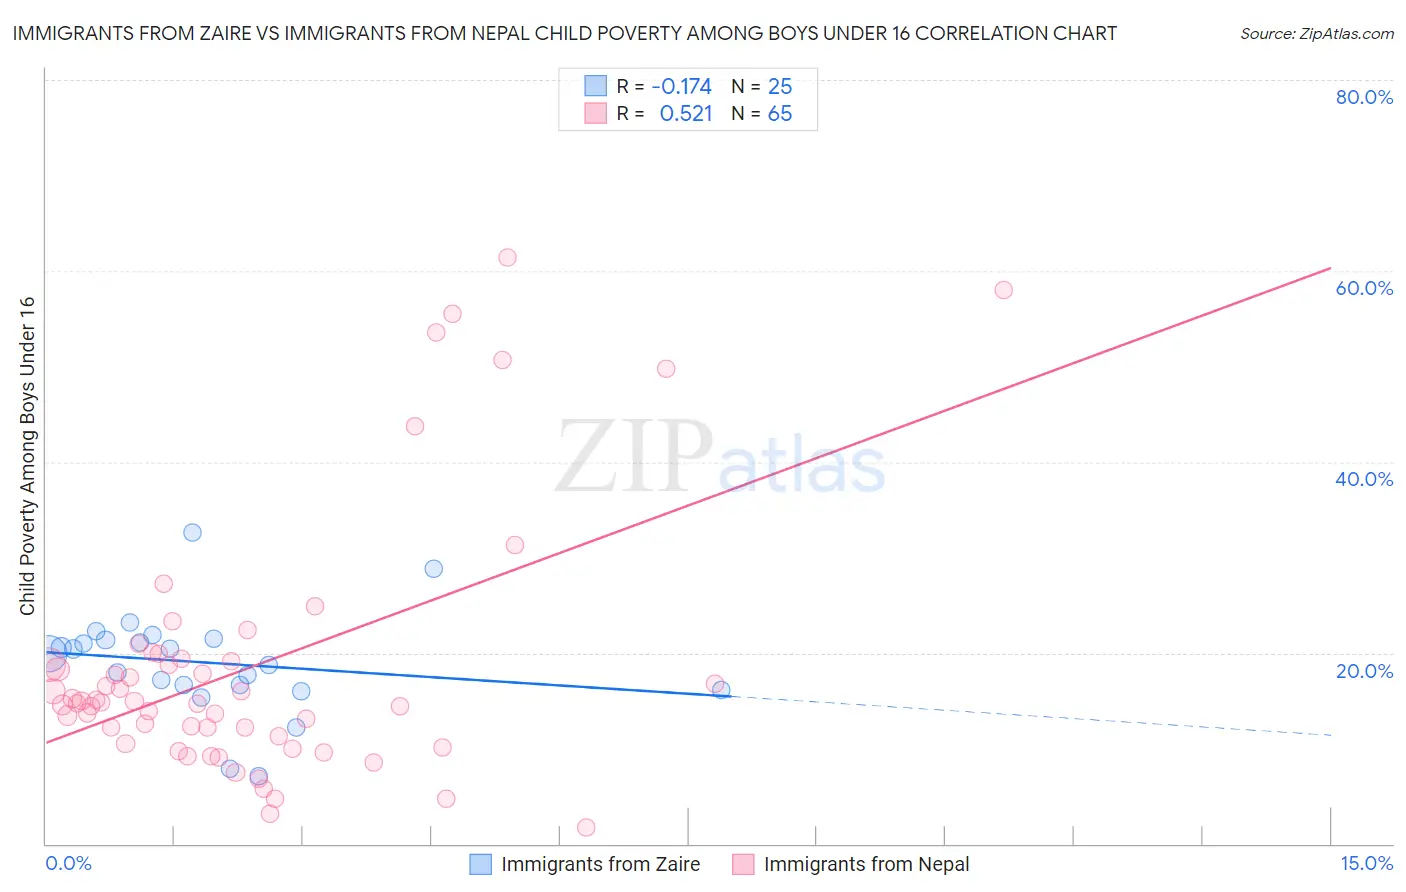 Immigrants from Zaire vs Immigrants from Nepal Child Poverty Among Boys Under 16